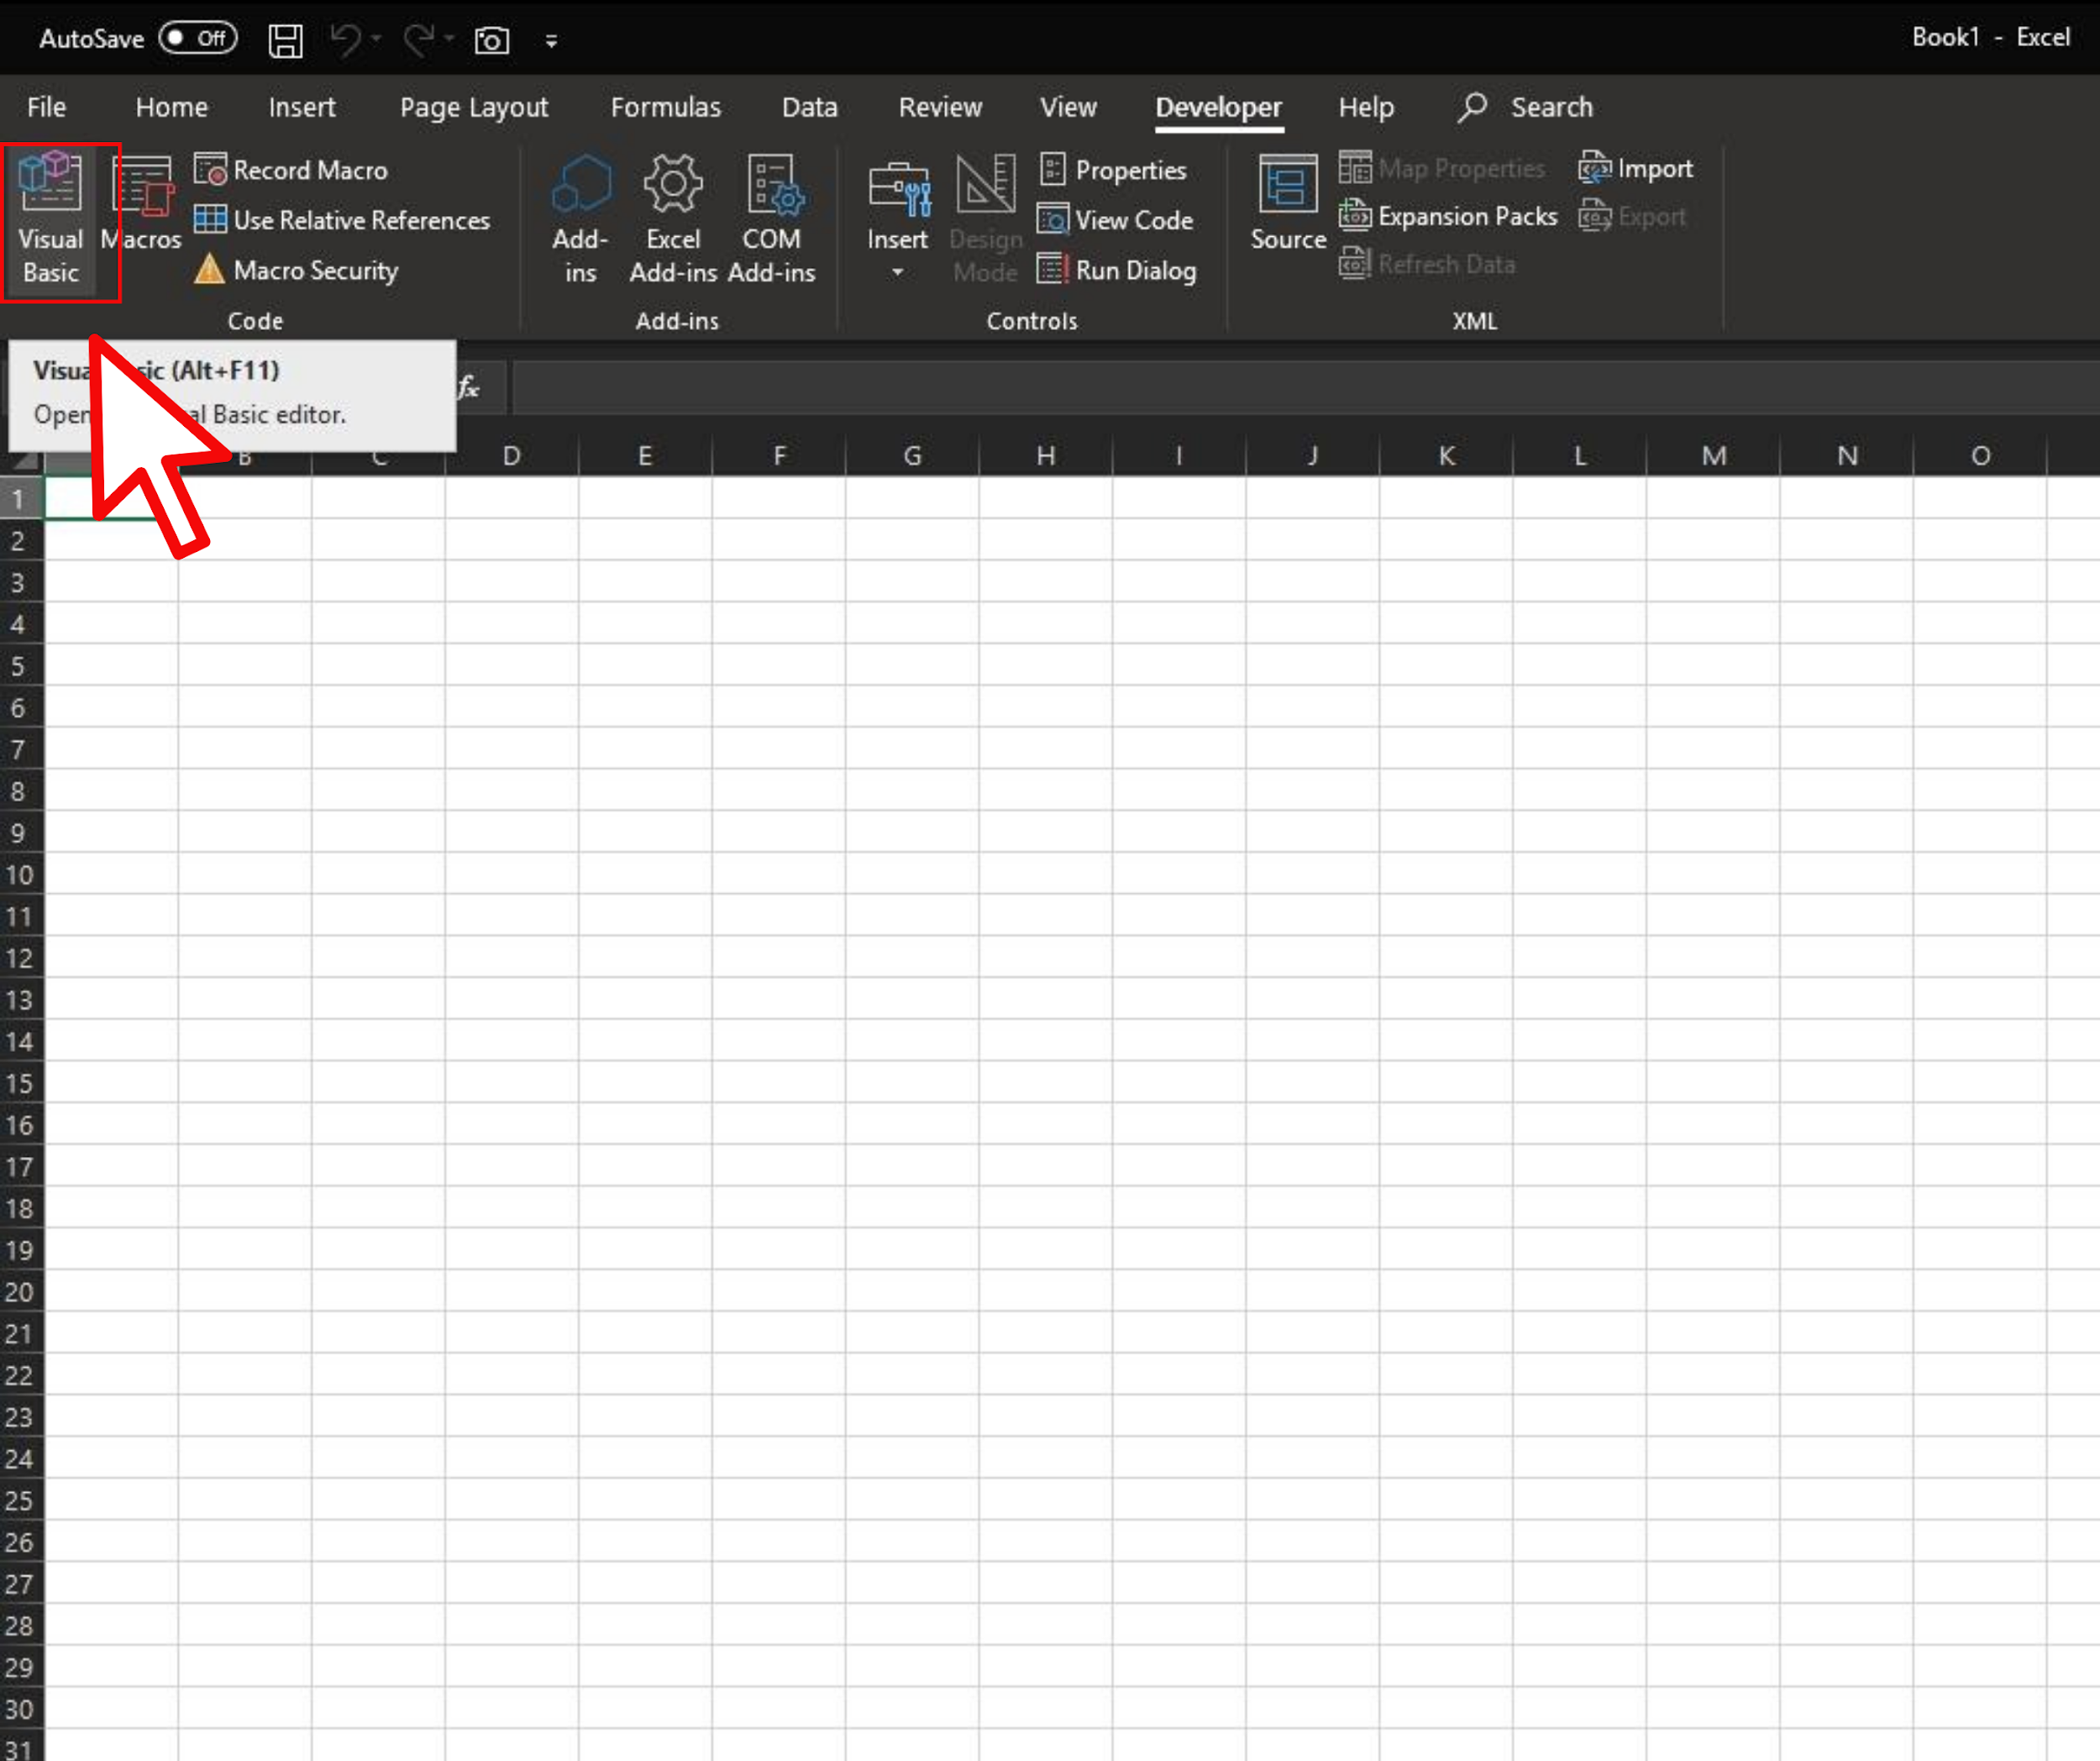 How To Export Multiple Excel Sheets To Csv Or Text Files Using Visual Basic Chipkin 9012